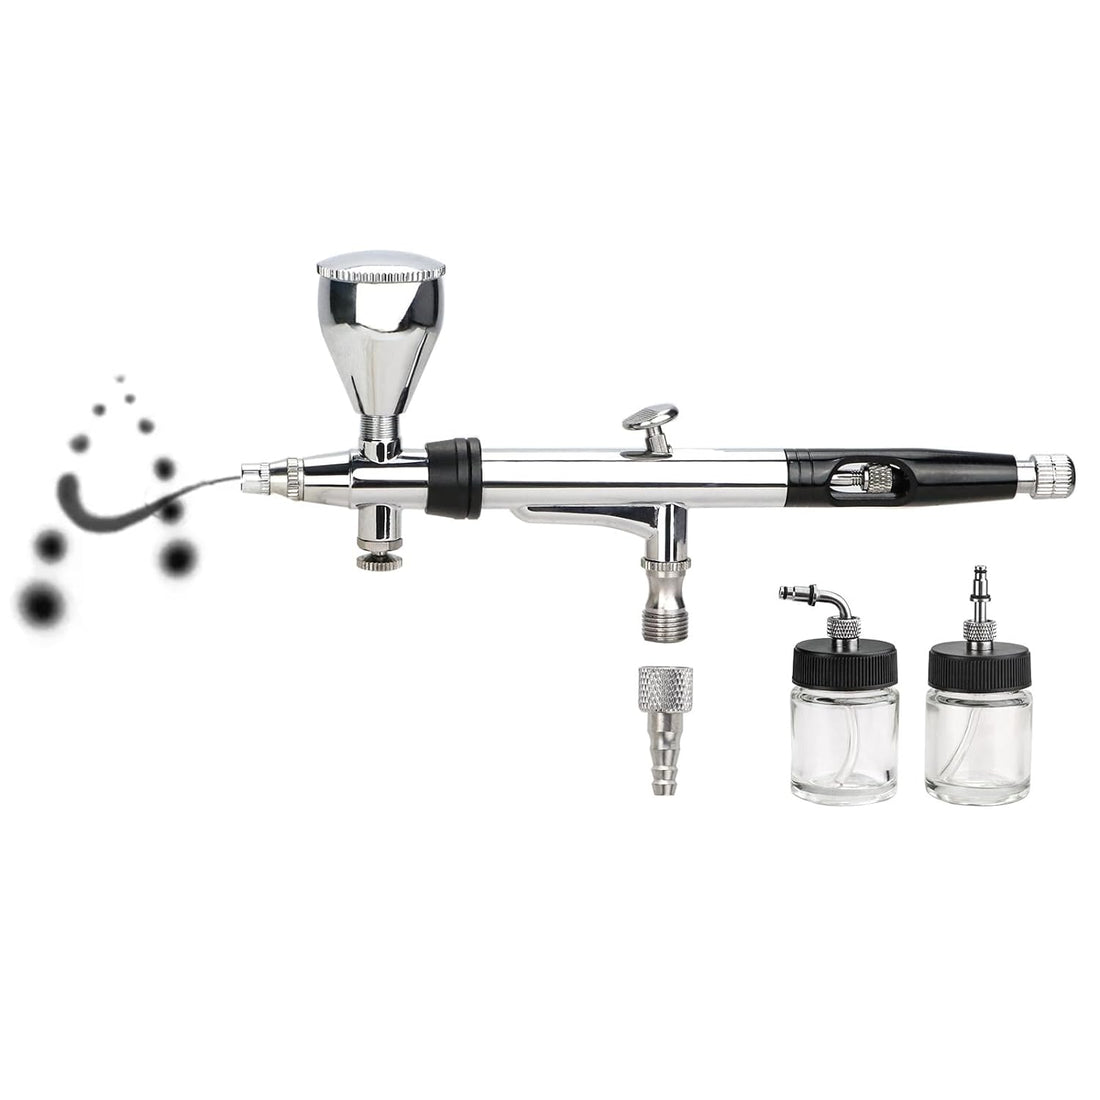 Anesty Rotary Airbrush, Dual-Acting Airbrush with Gravity/Bottom/Side Cup& Siphon Feed Jars, Smooth Rotating Air Brush for Painting Model Makeup Tattoo Nail Art Coloring Cake Decor A360K